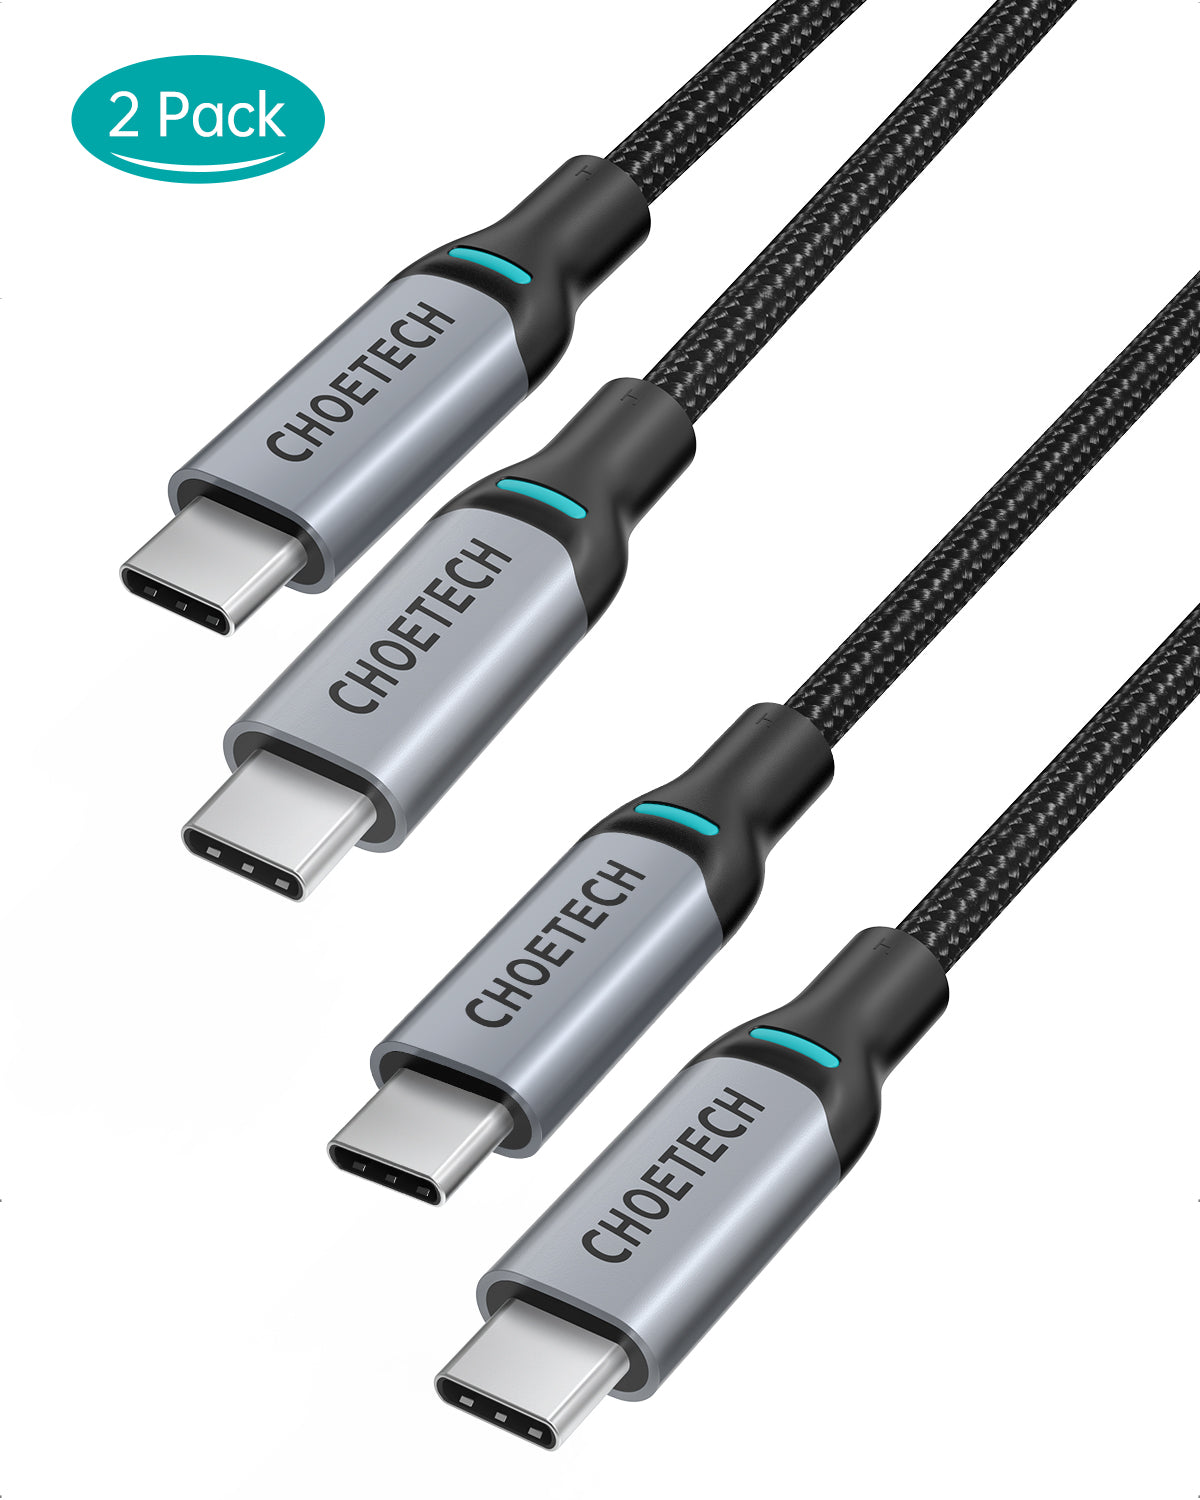 XCC-1002-BK Choetech USB C to USB C Cable 2 Pack (100W) 6ft Braided Type C Cable